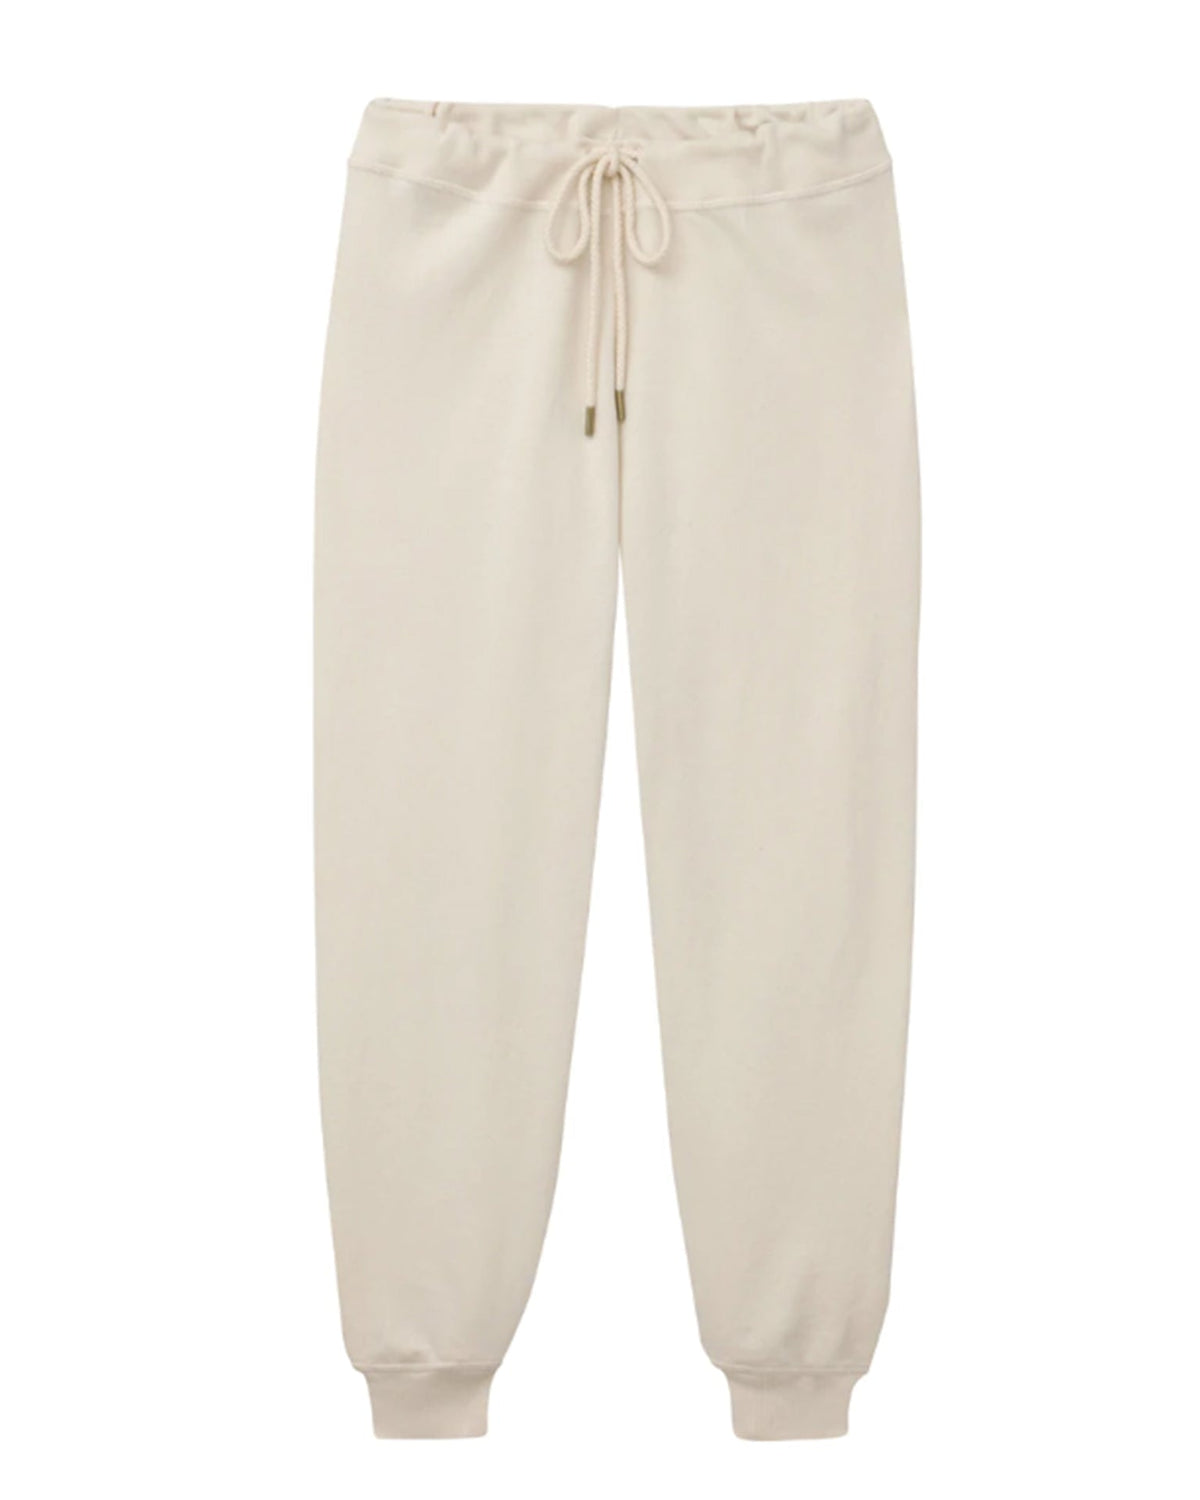 the Great Clothing The Cropped Sweatpant in Washed White